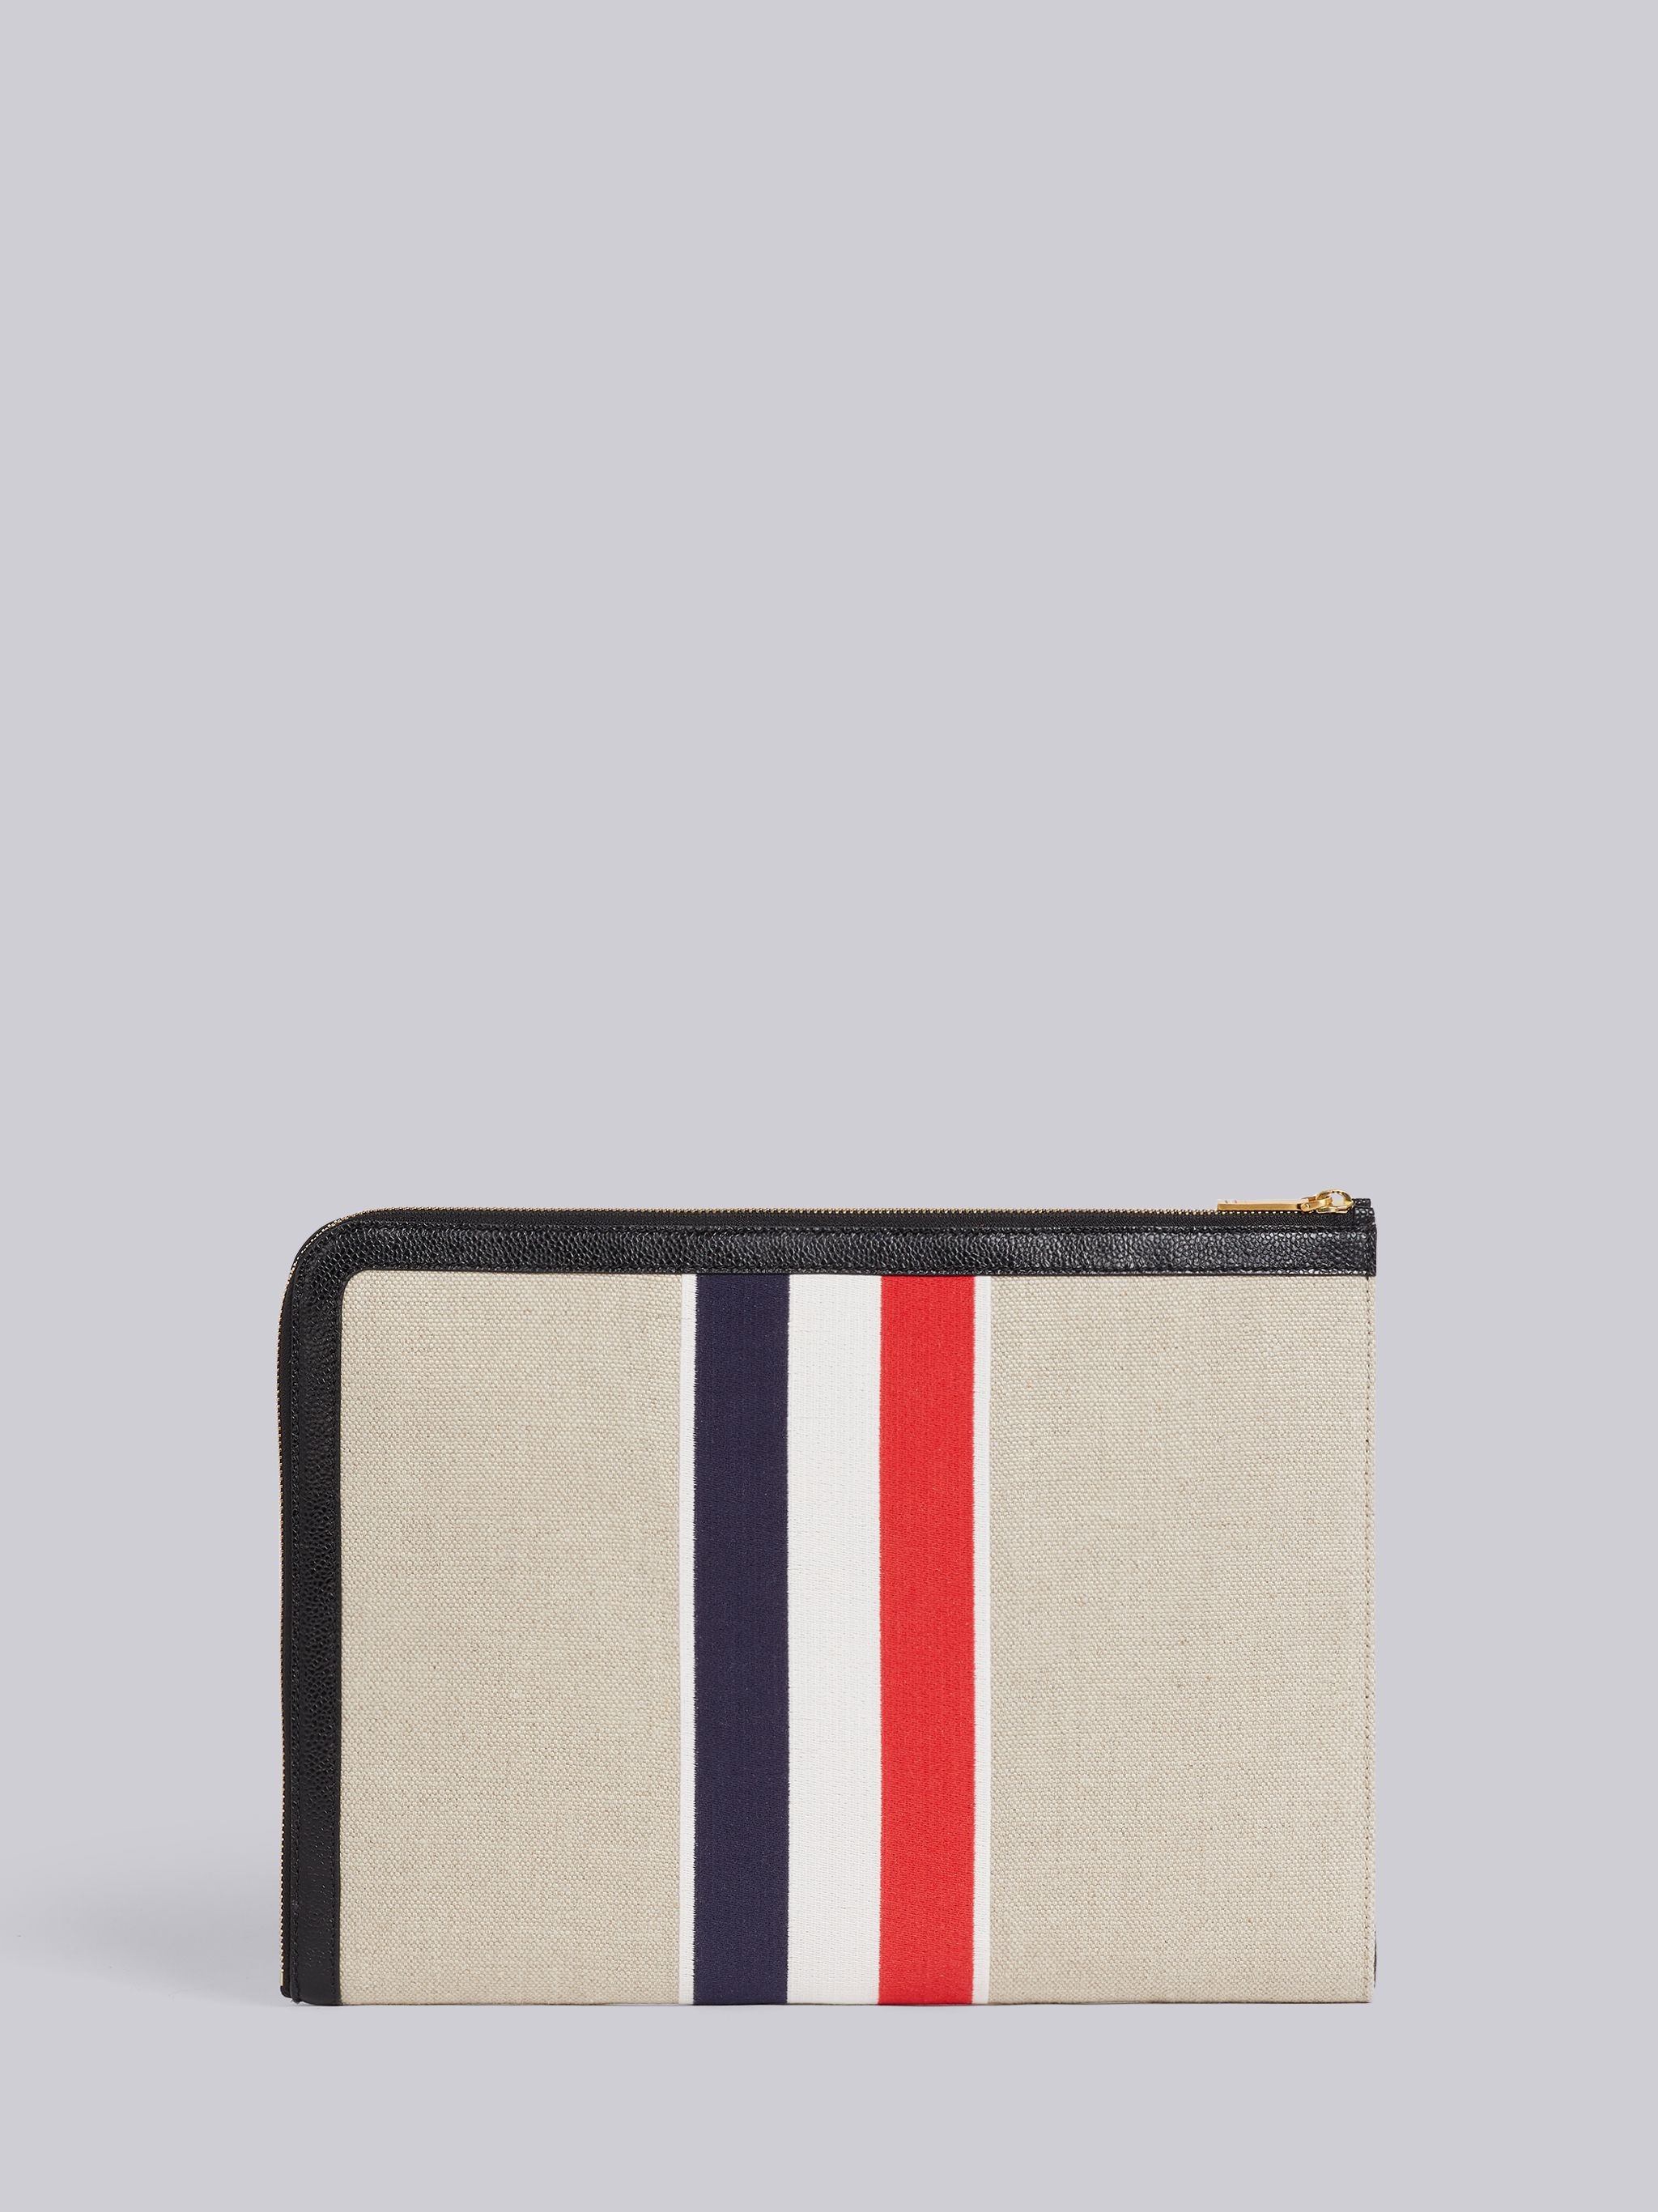 Natural Military Canvas Striped Gusset Folio - 2